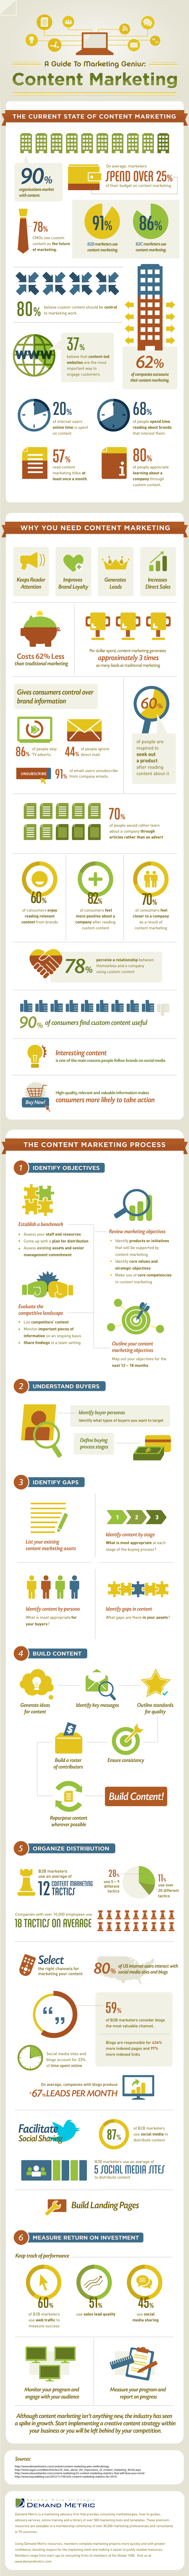 beginners-guide-to-content-marketing-infographic